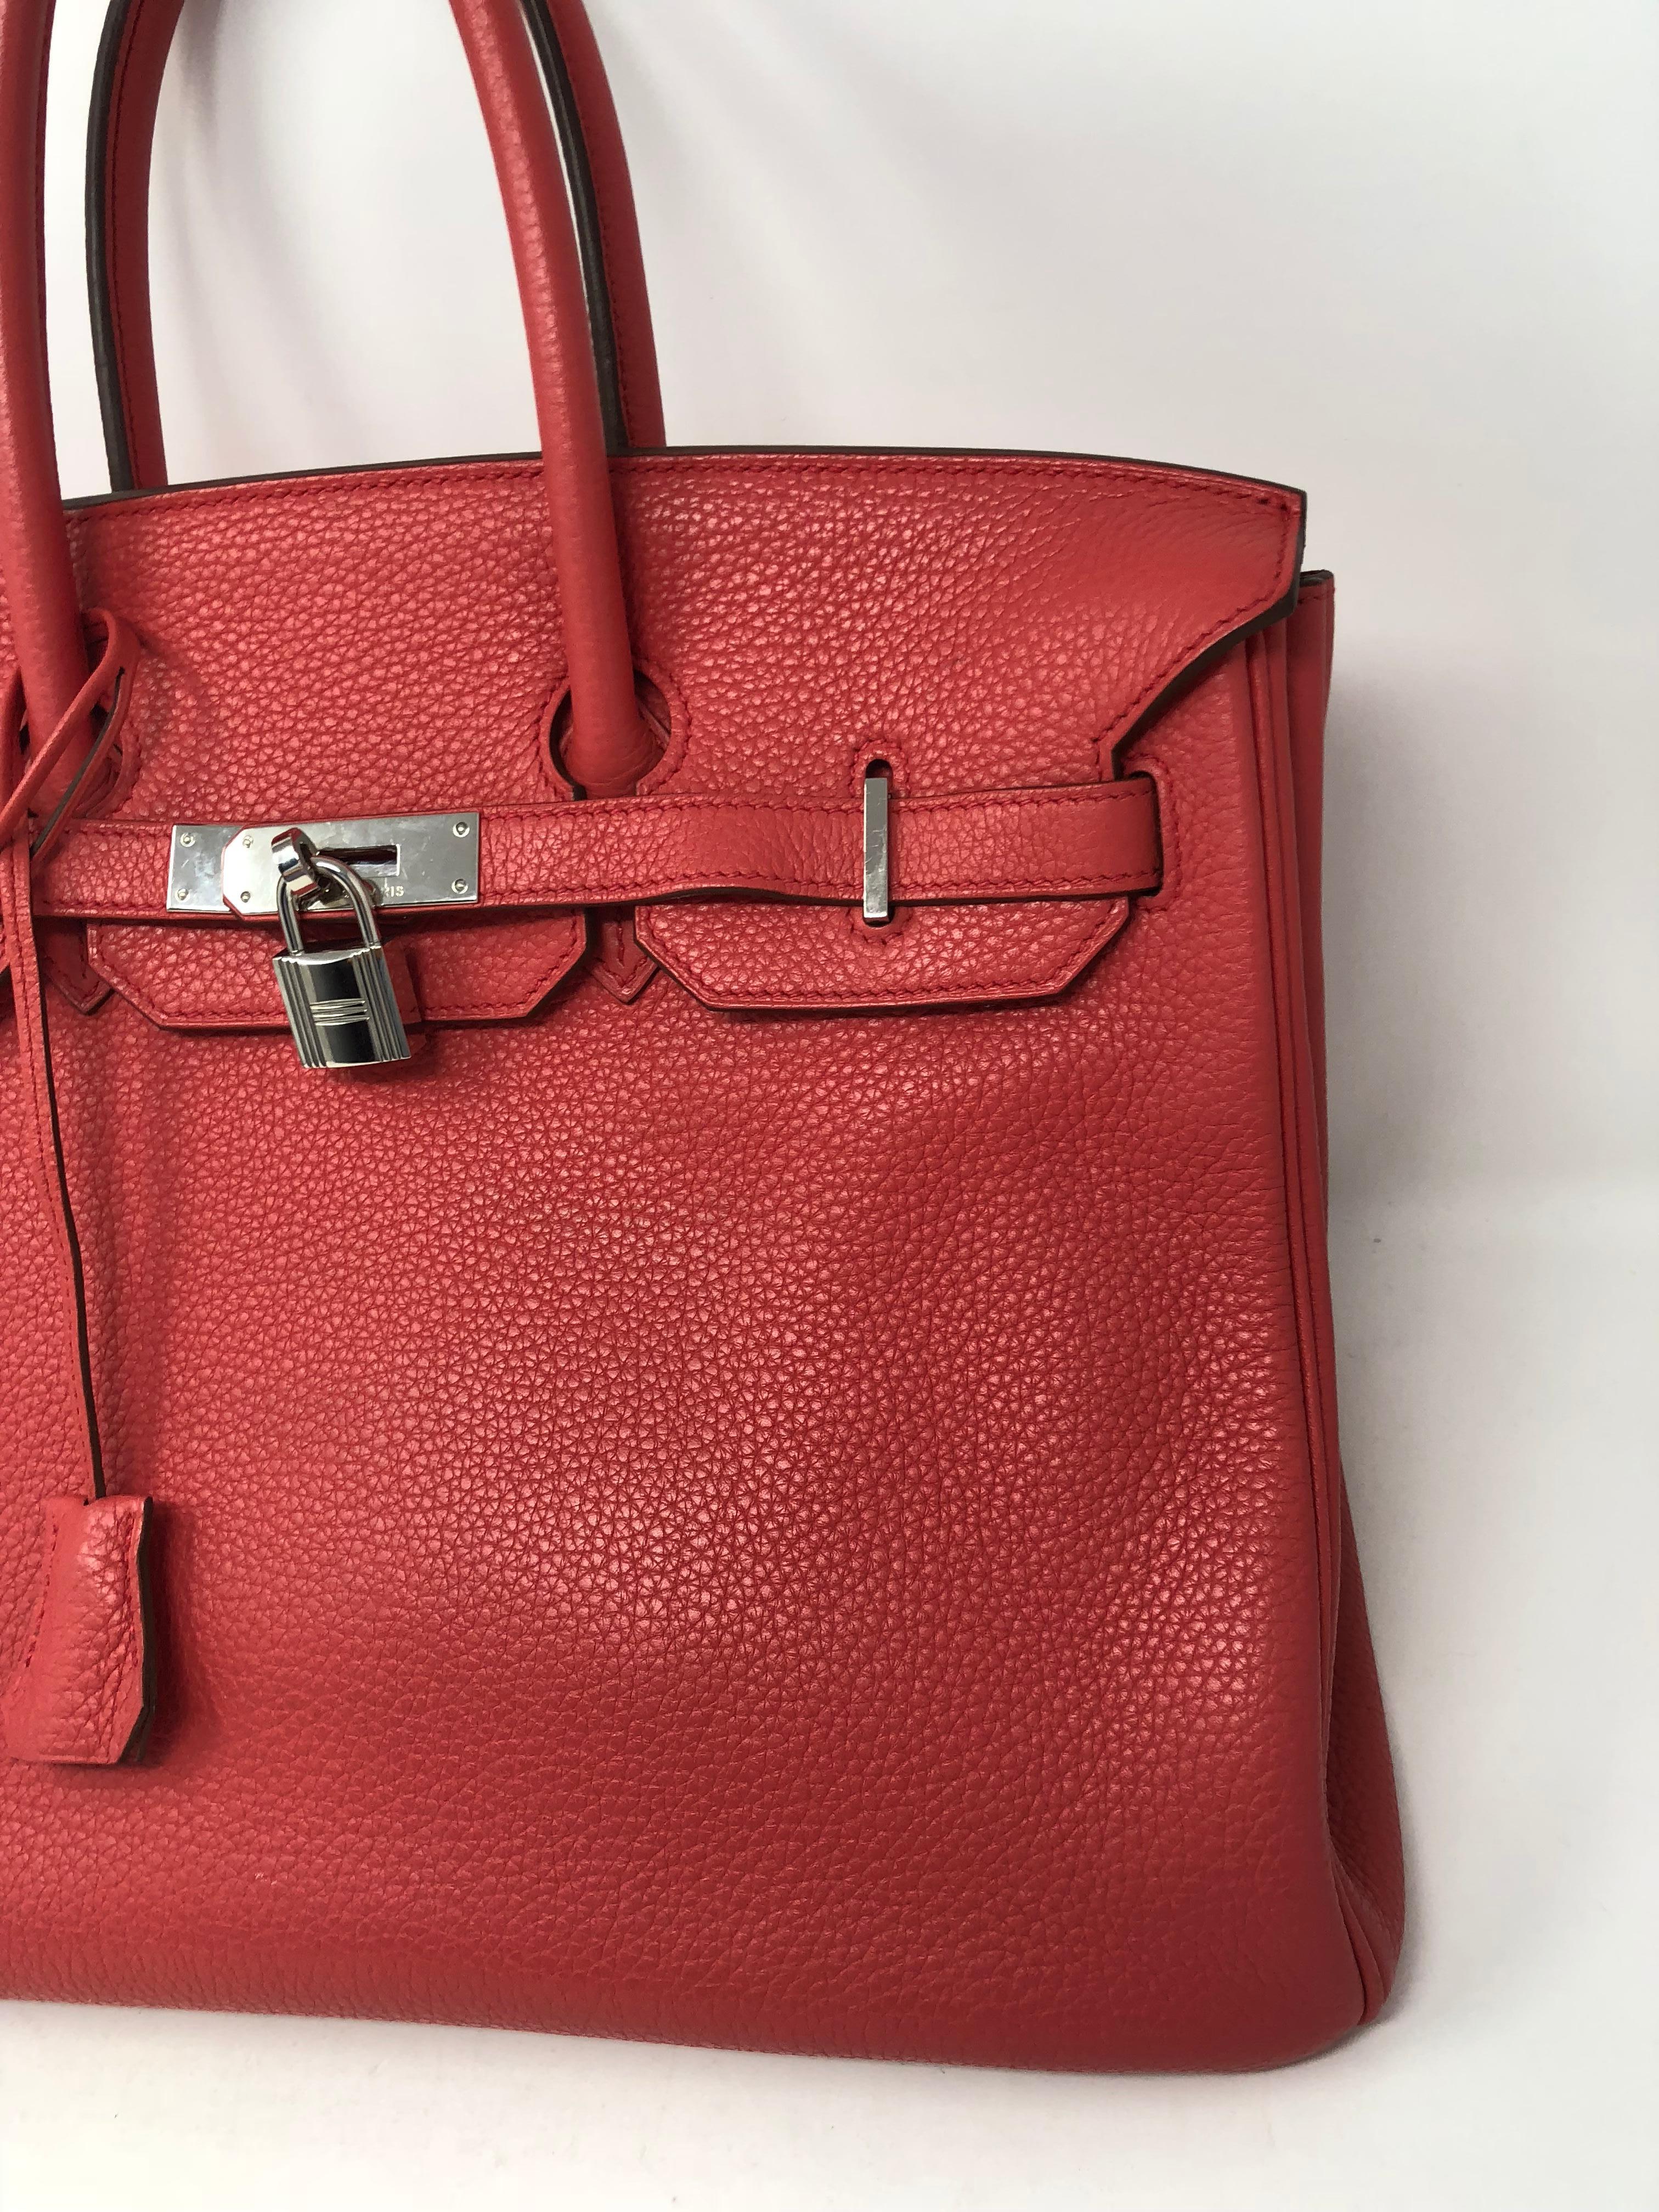 Hermes Birkin 35 in Bouganvillea Pink color togo leather. Palladium hardware and in excellent condition. Beautiful dark pink that will add a pop of color to any wardrobe. Rare color and perfect 35 size. Stamped M square from 2009. 